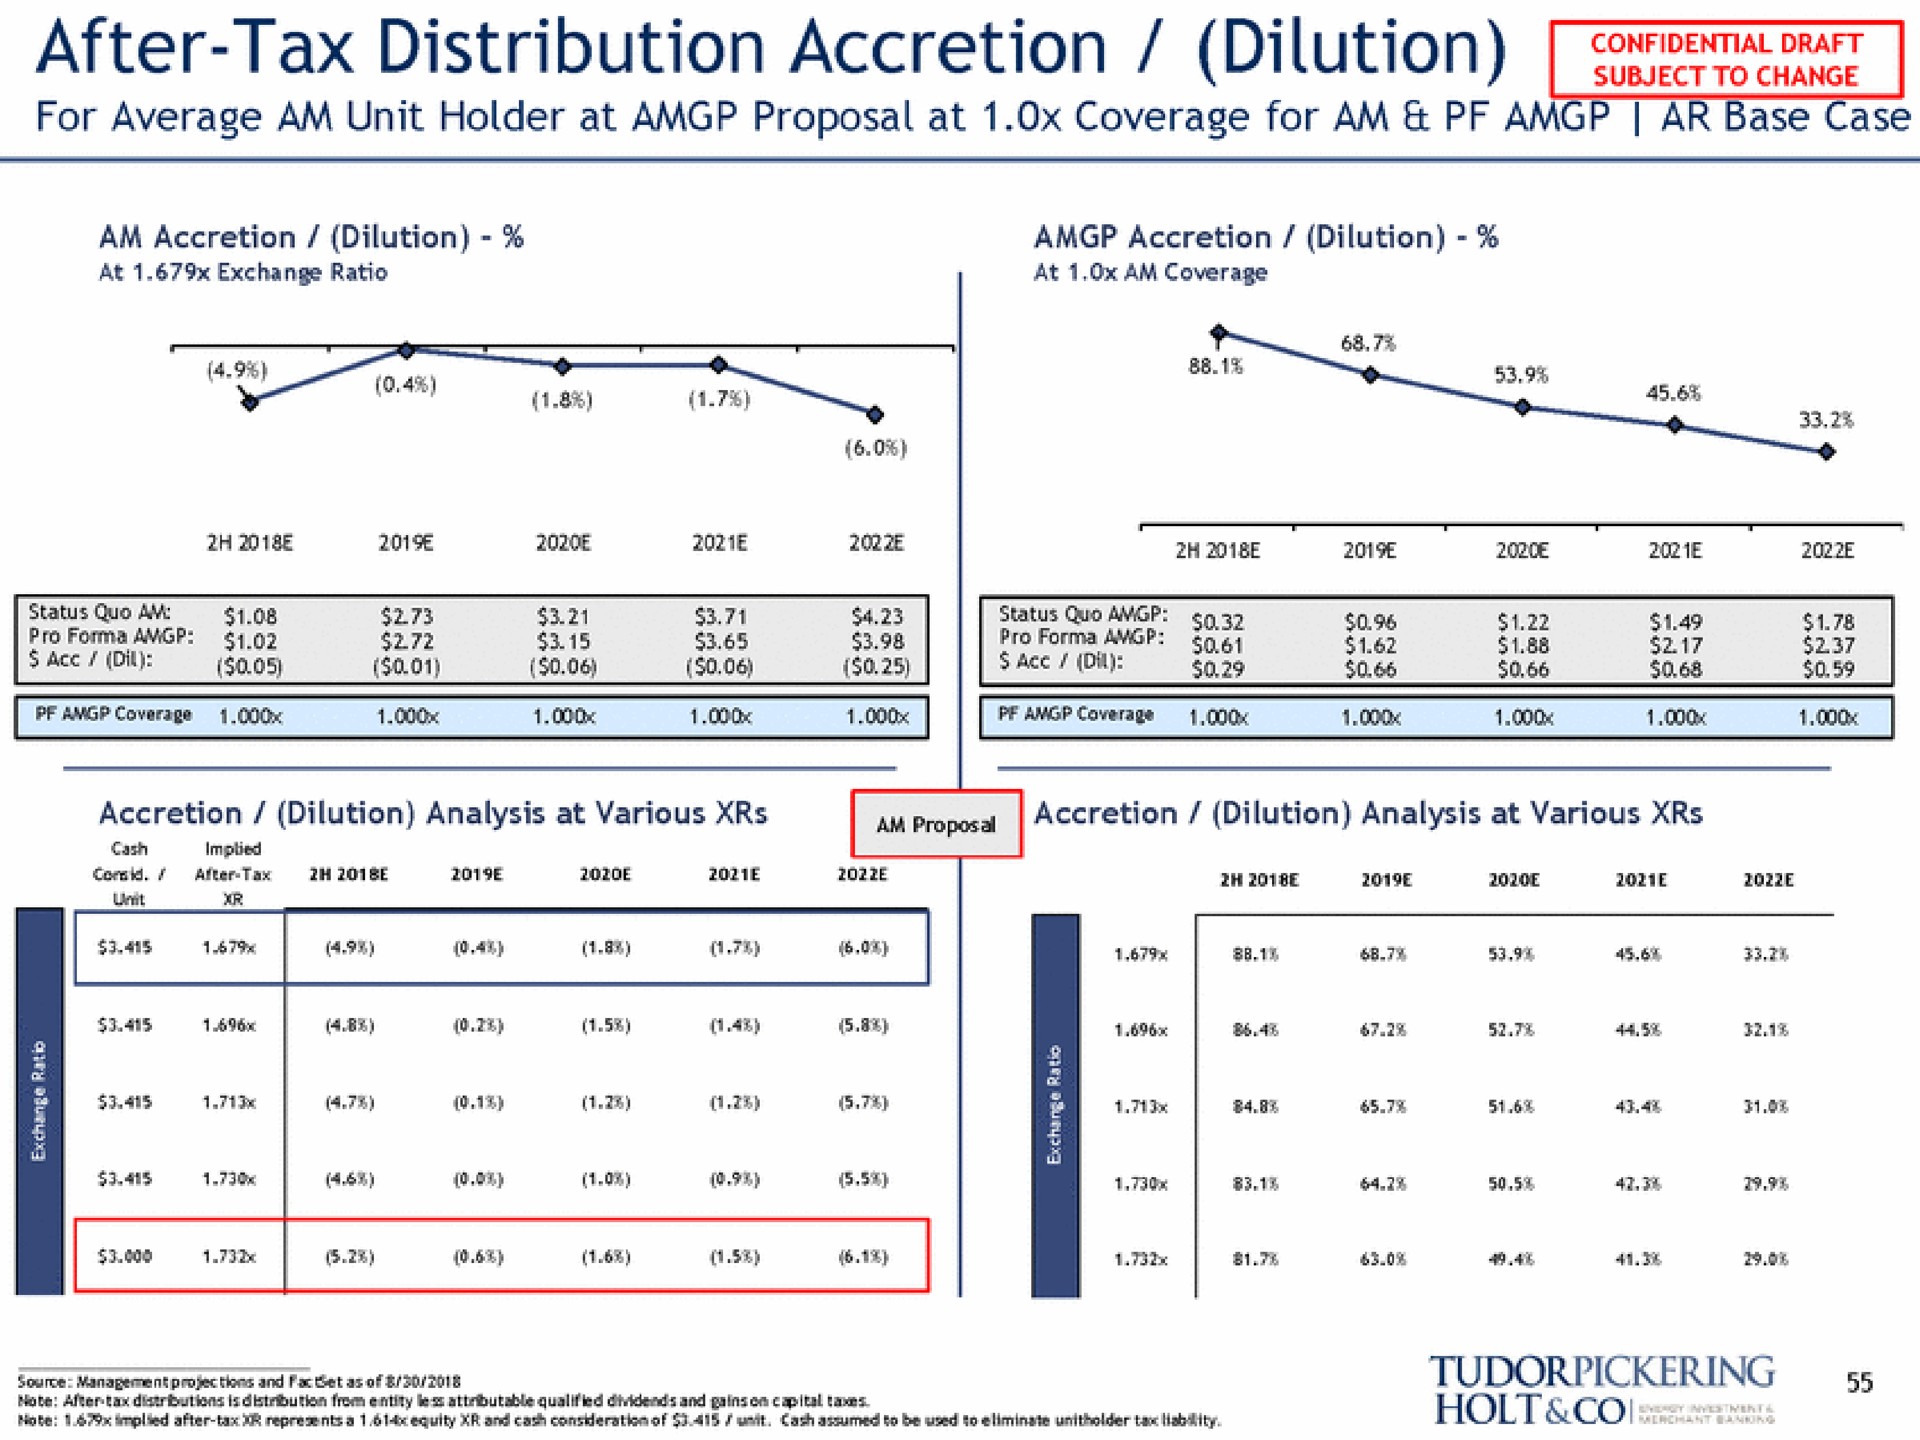 after tax distribution accretion dilution | Tudor, Pickering, Holt & Co